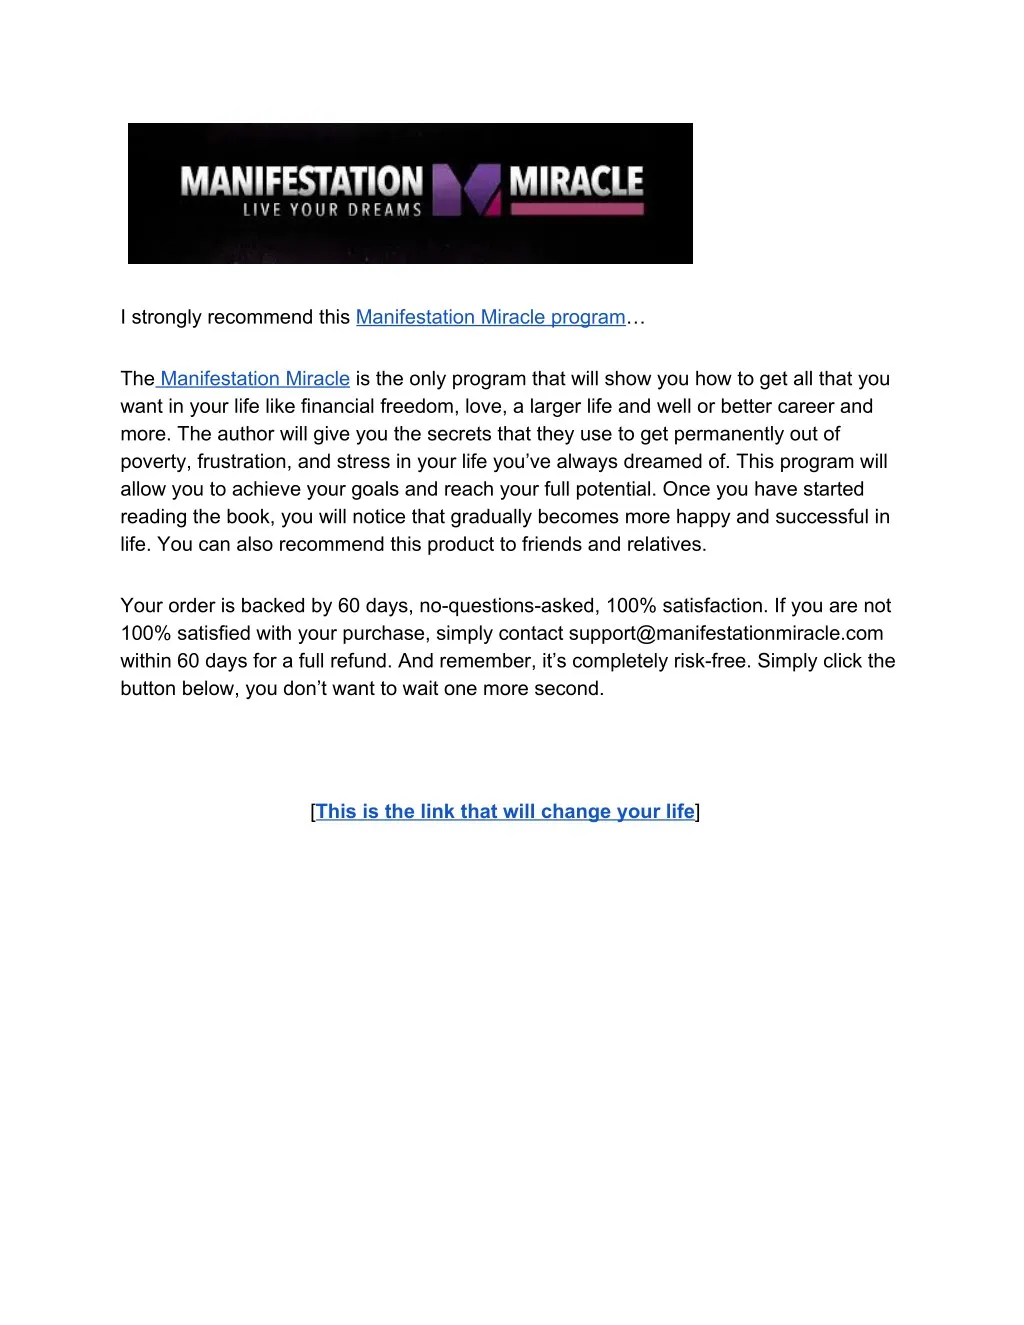 i strongly recommend this manifestation miracle